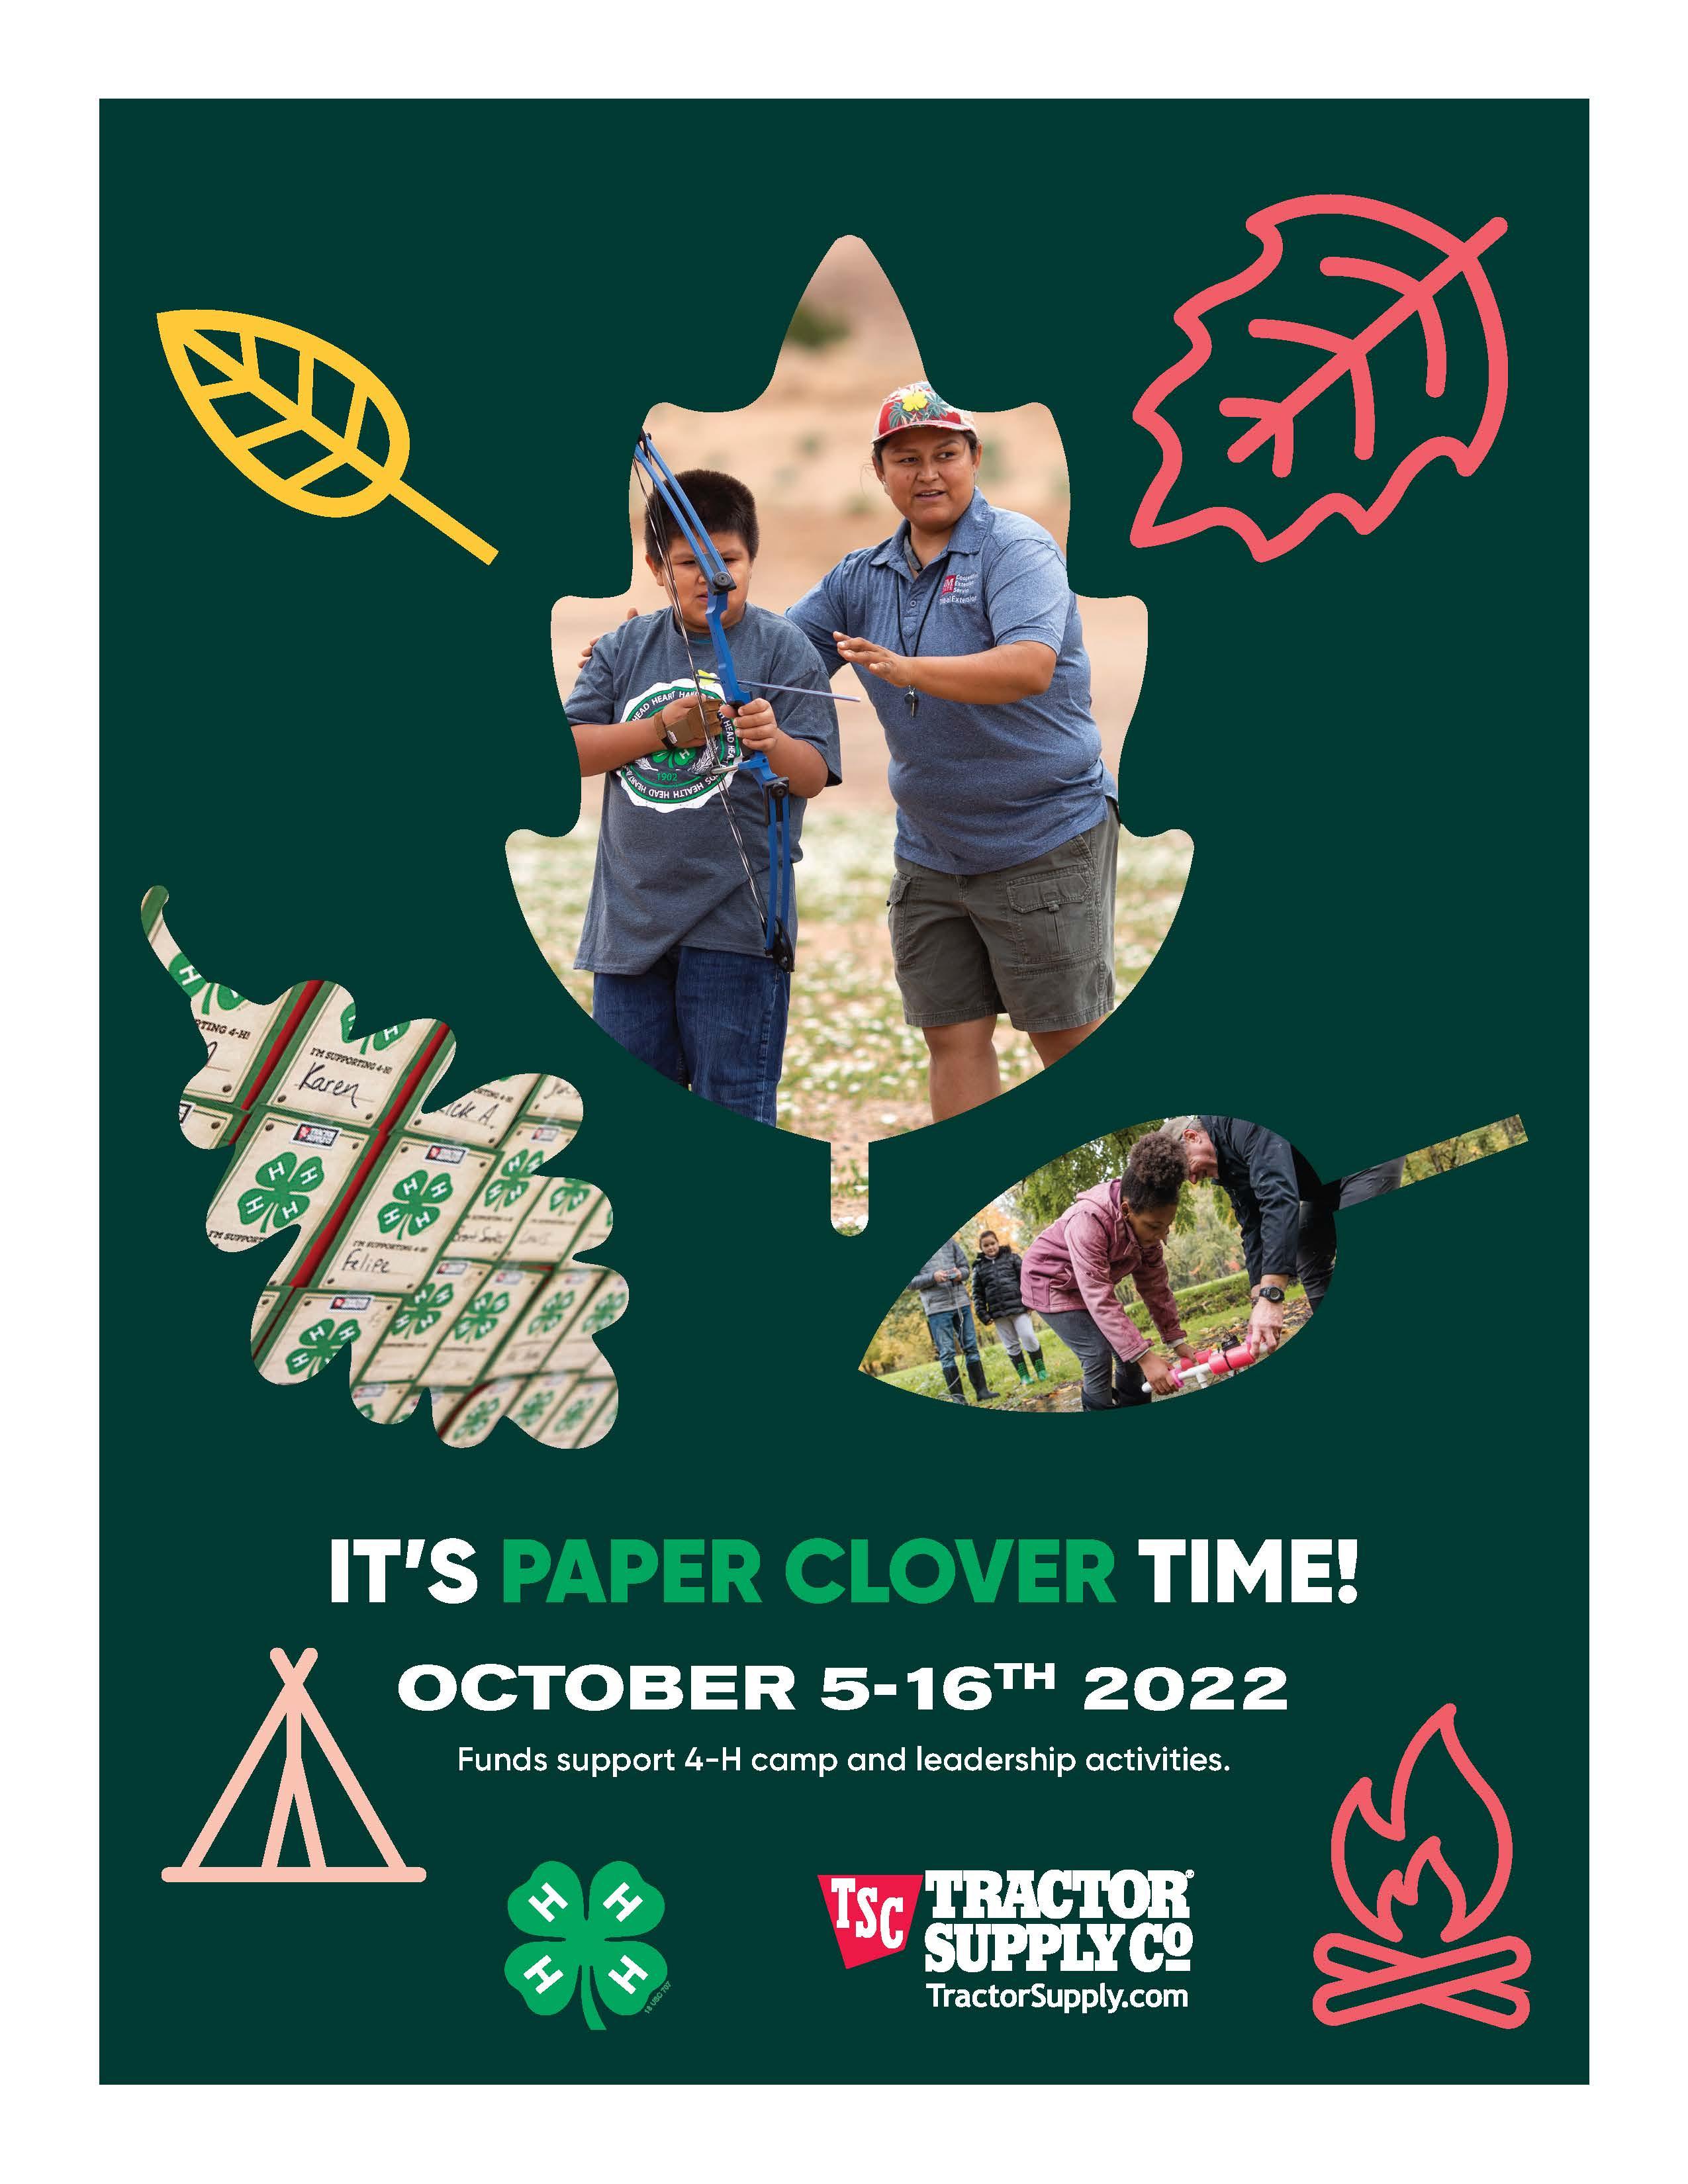 Fall 22 Paper Clover Campaign Sign Up